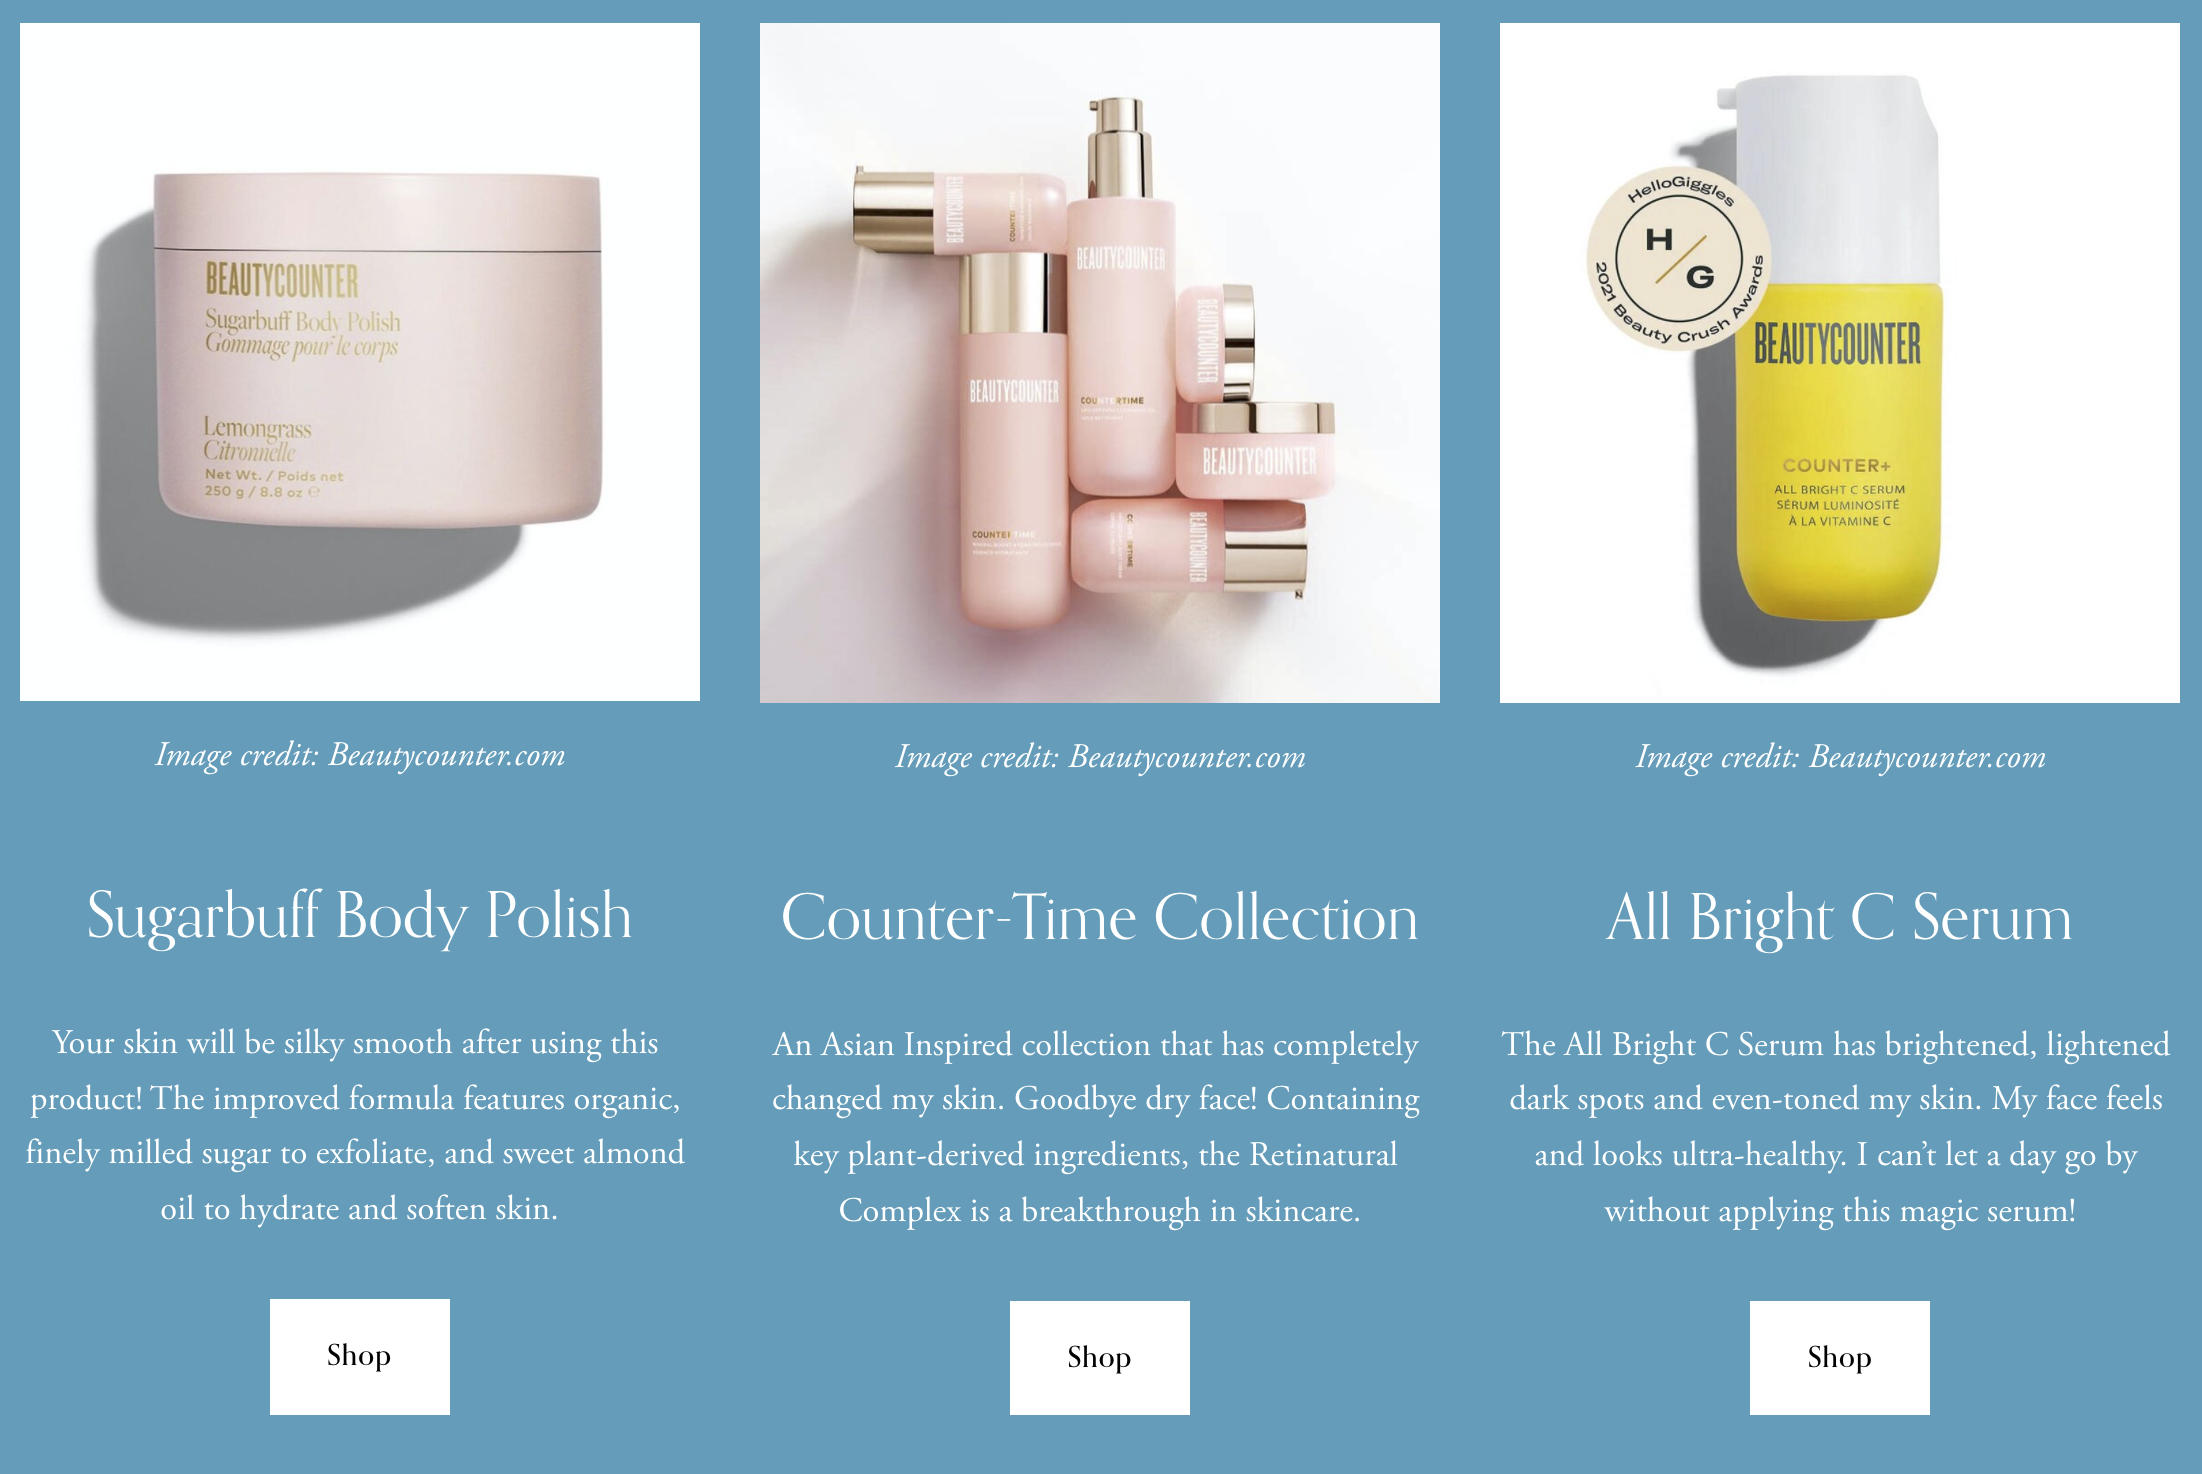 beauty counter online shopping website design by bishop content studio